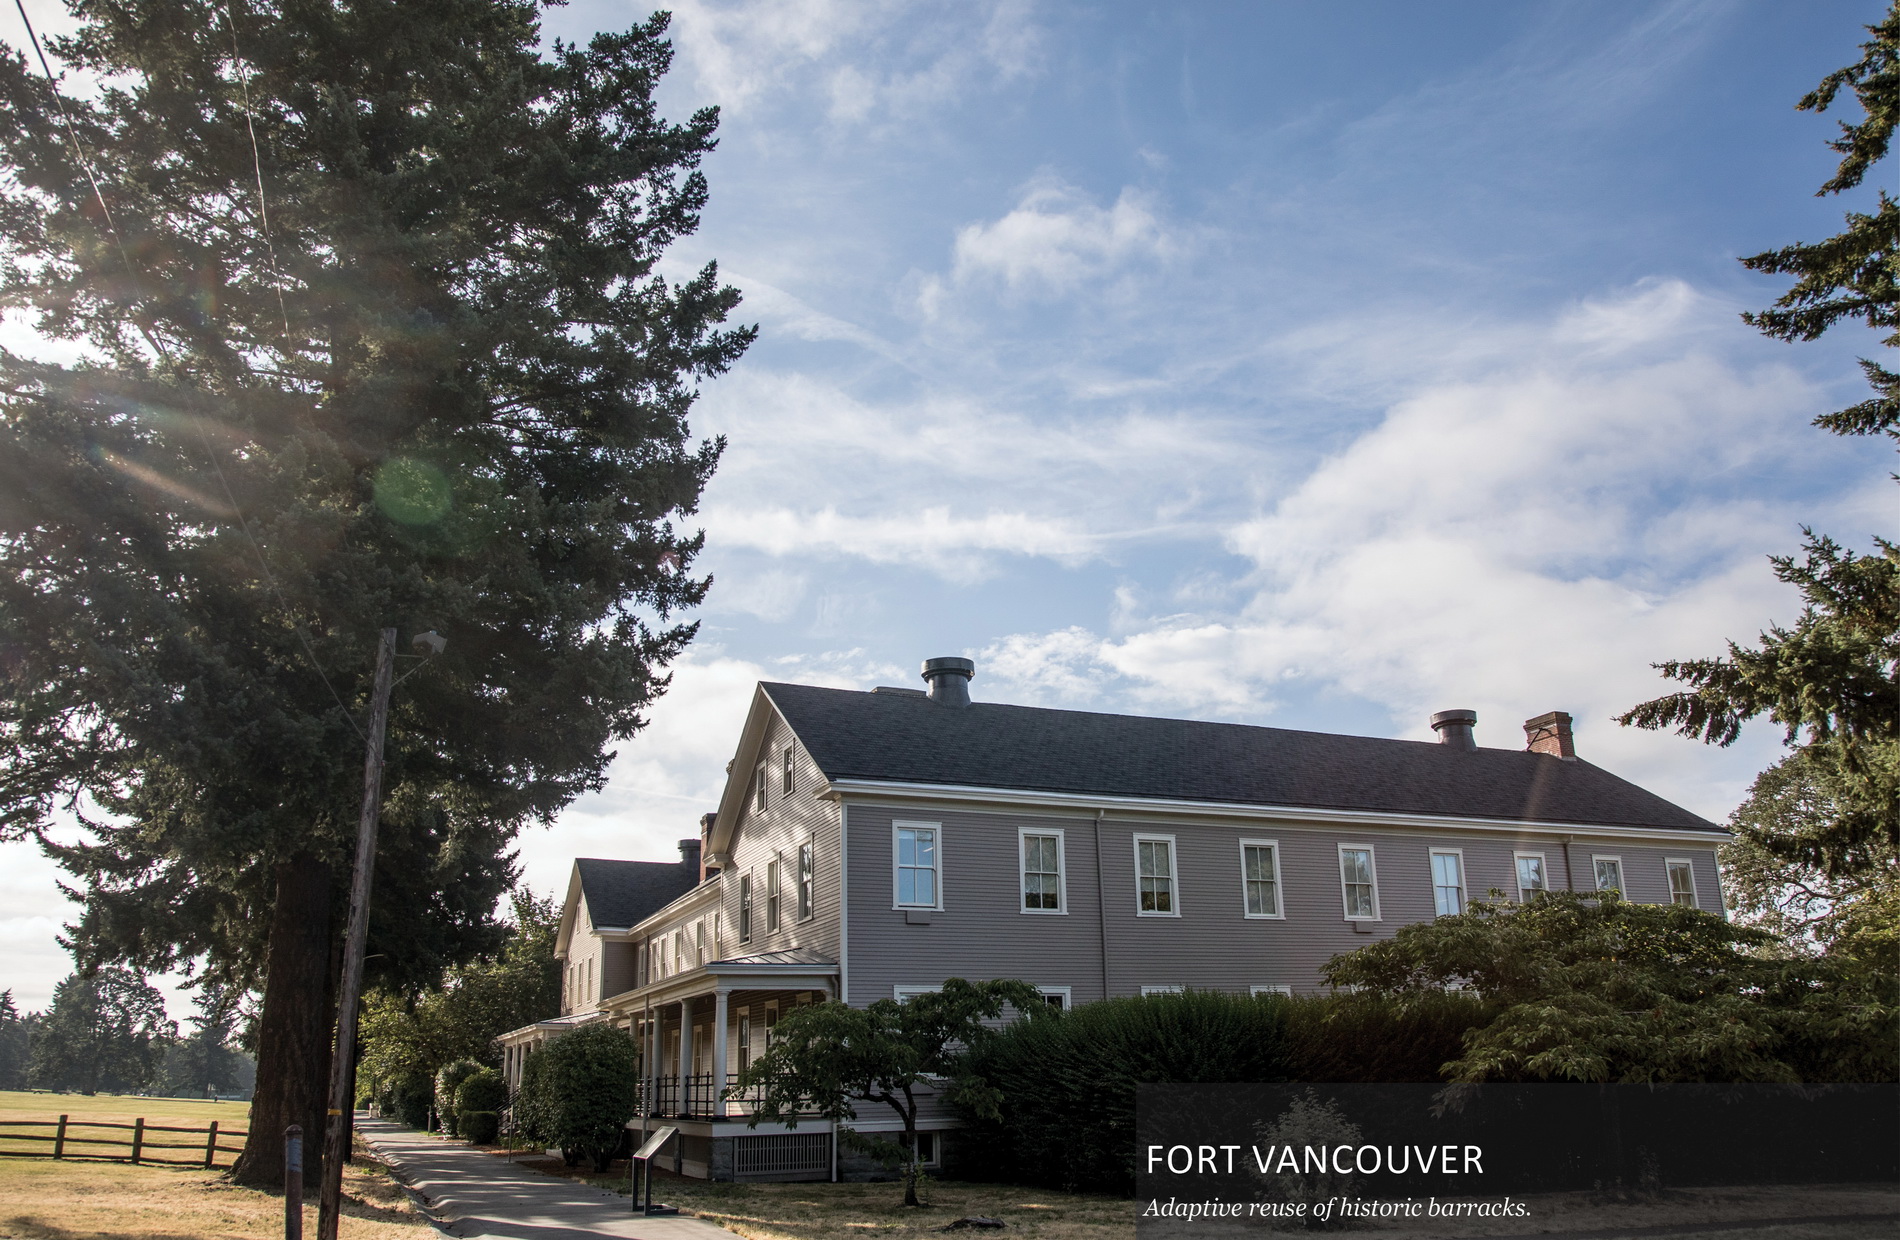 Fort Vancouver barracks surrounded by trees